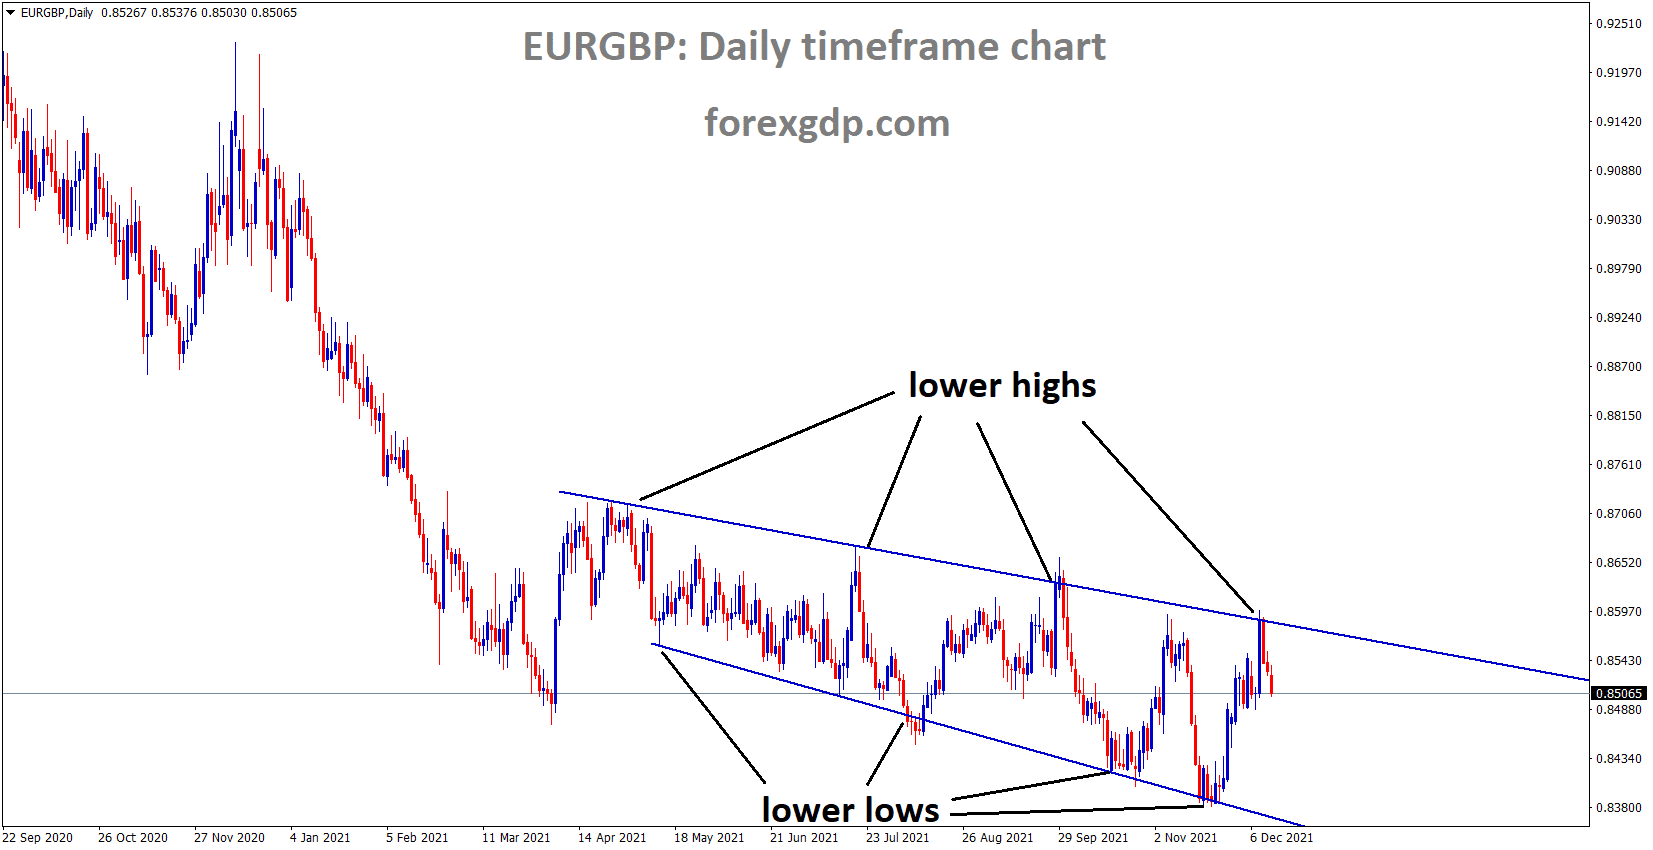 EURGBP is moving in the descending channel and the market fell from the lower high area of the channel